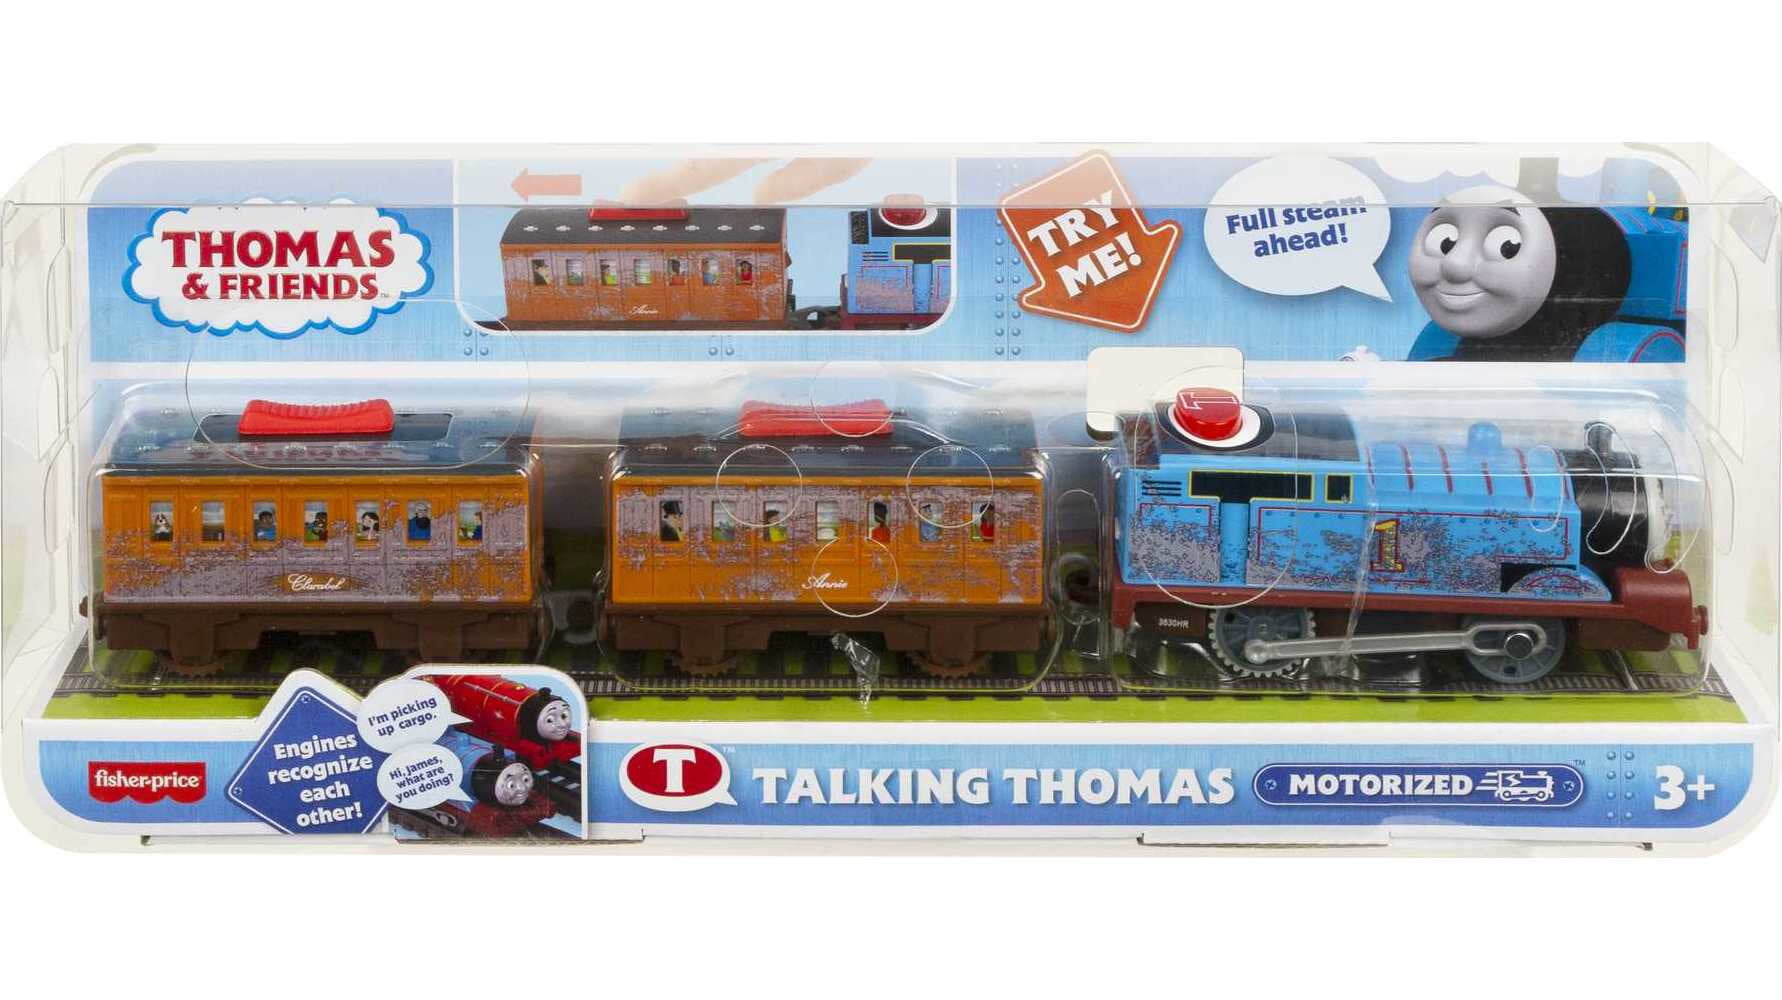 FISHER PRICE TRACKMASTER THOMAS AND FRIENDS TALKING THOMAS ENGINE 